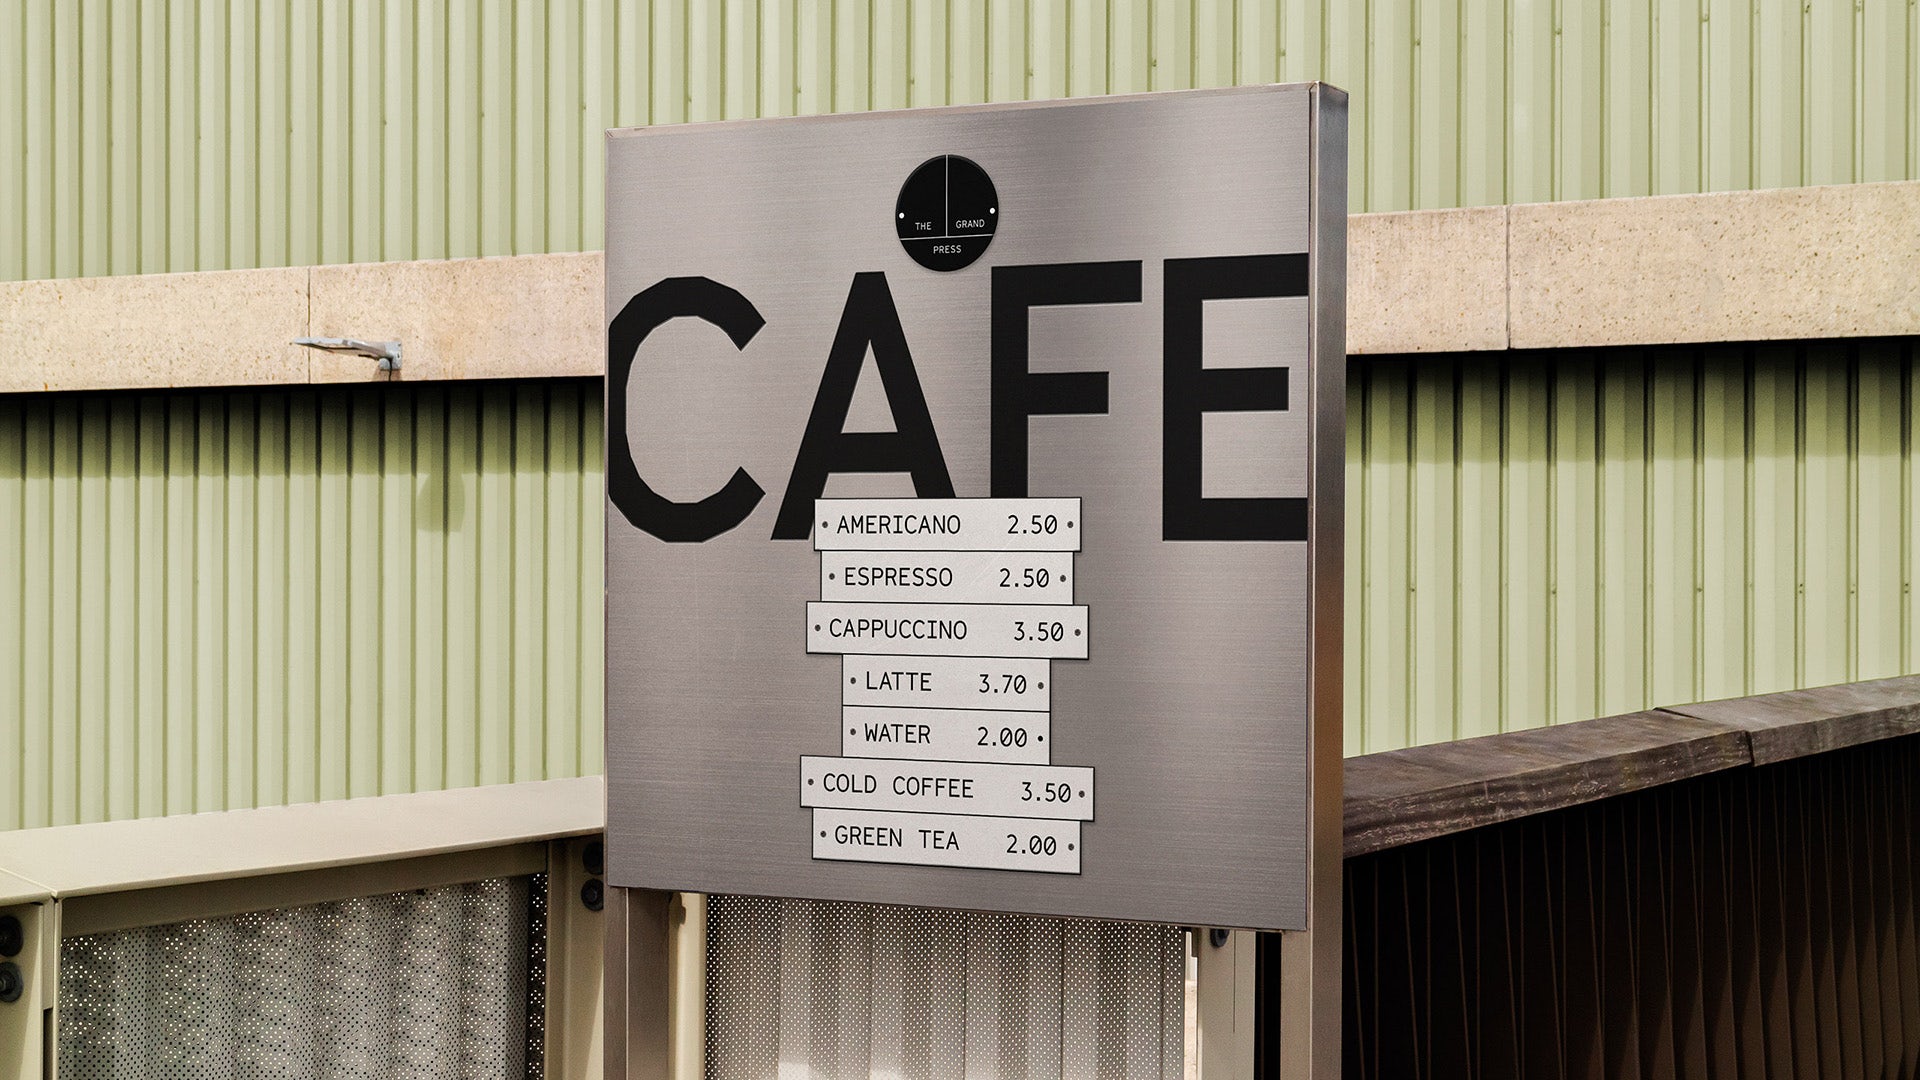 Image shows a menu for the Grand Press cafe featuring a price list on a grey background